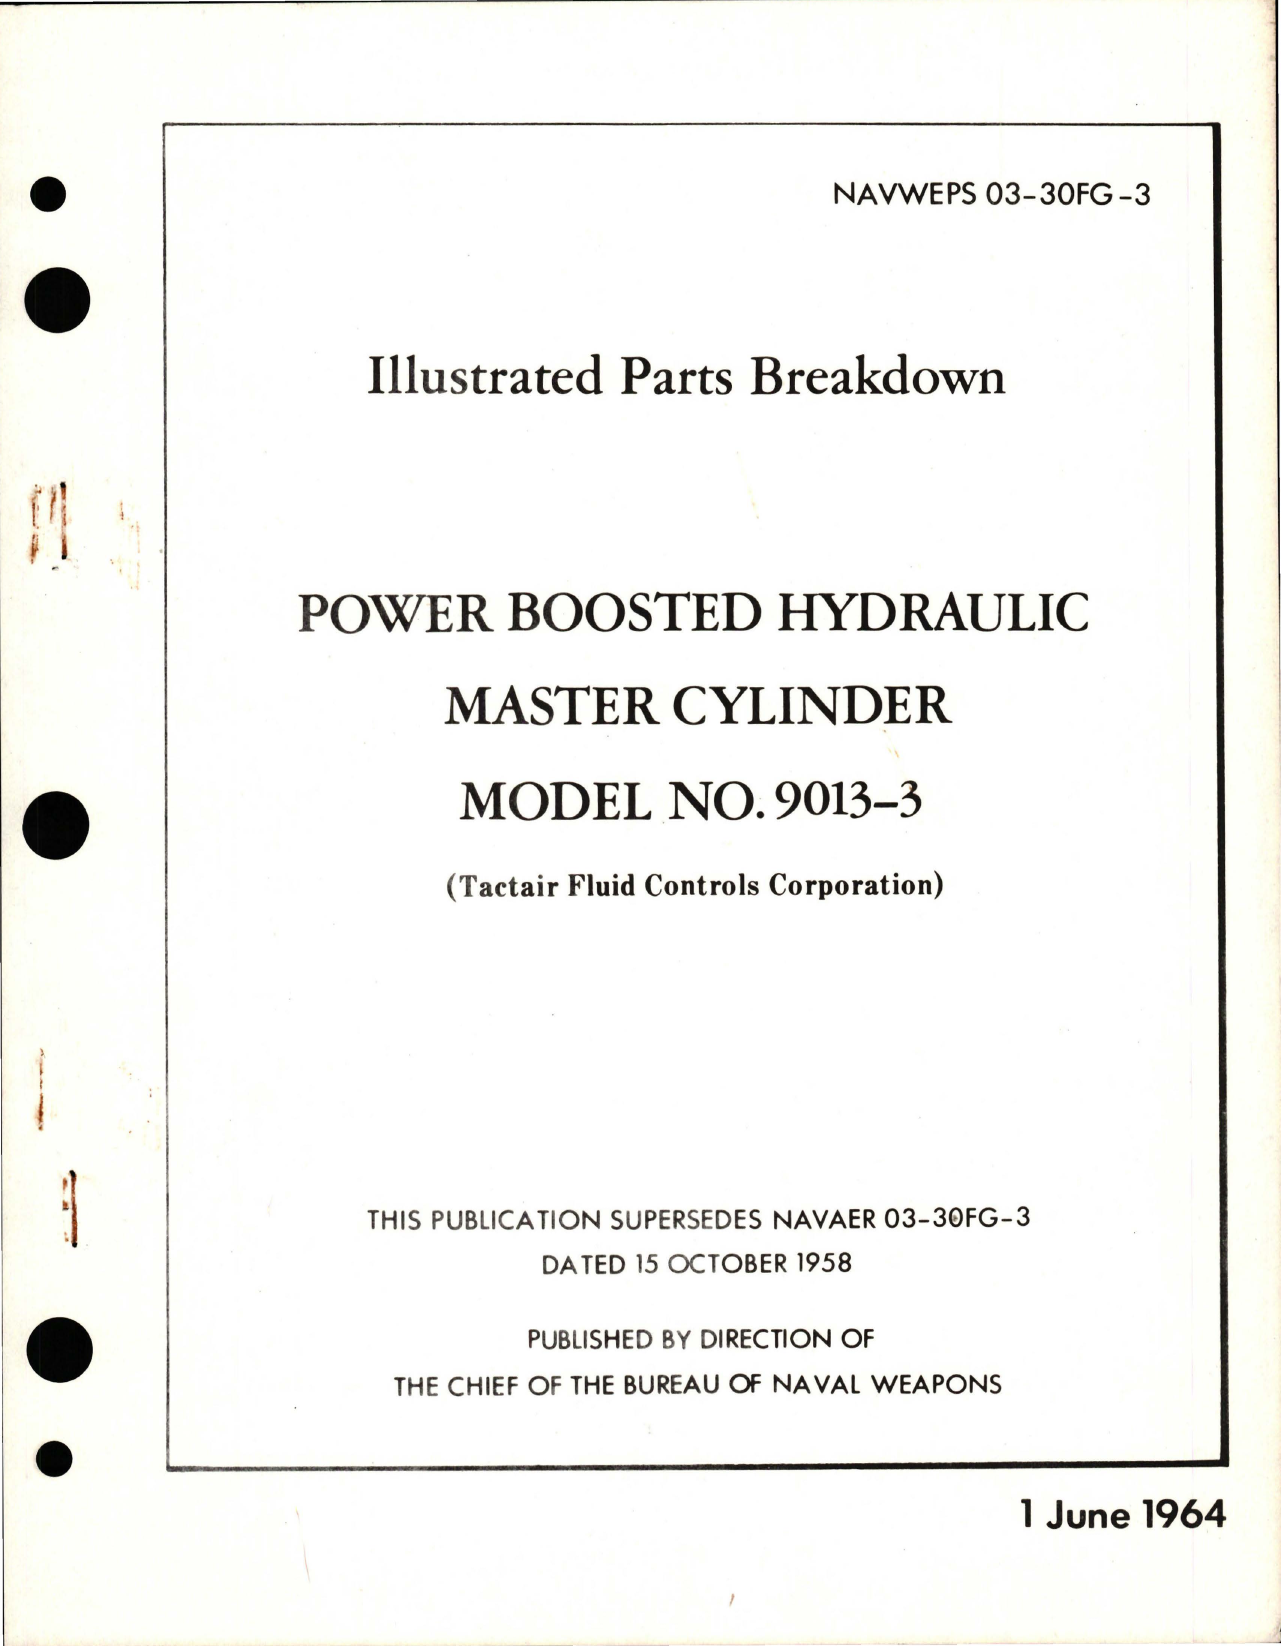 Sample page 1 from AirCorps Library document: Illustrated Parts Breakdown for Power Boosted Hydraulic Master Cylinder - Model 9013-3